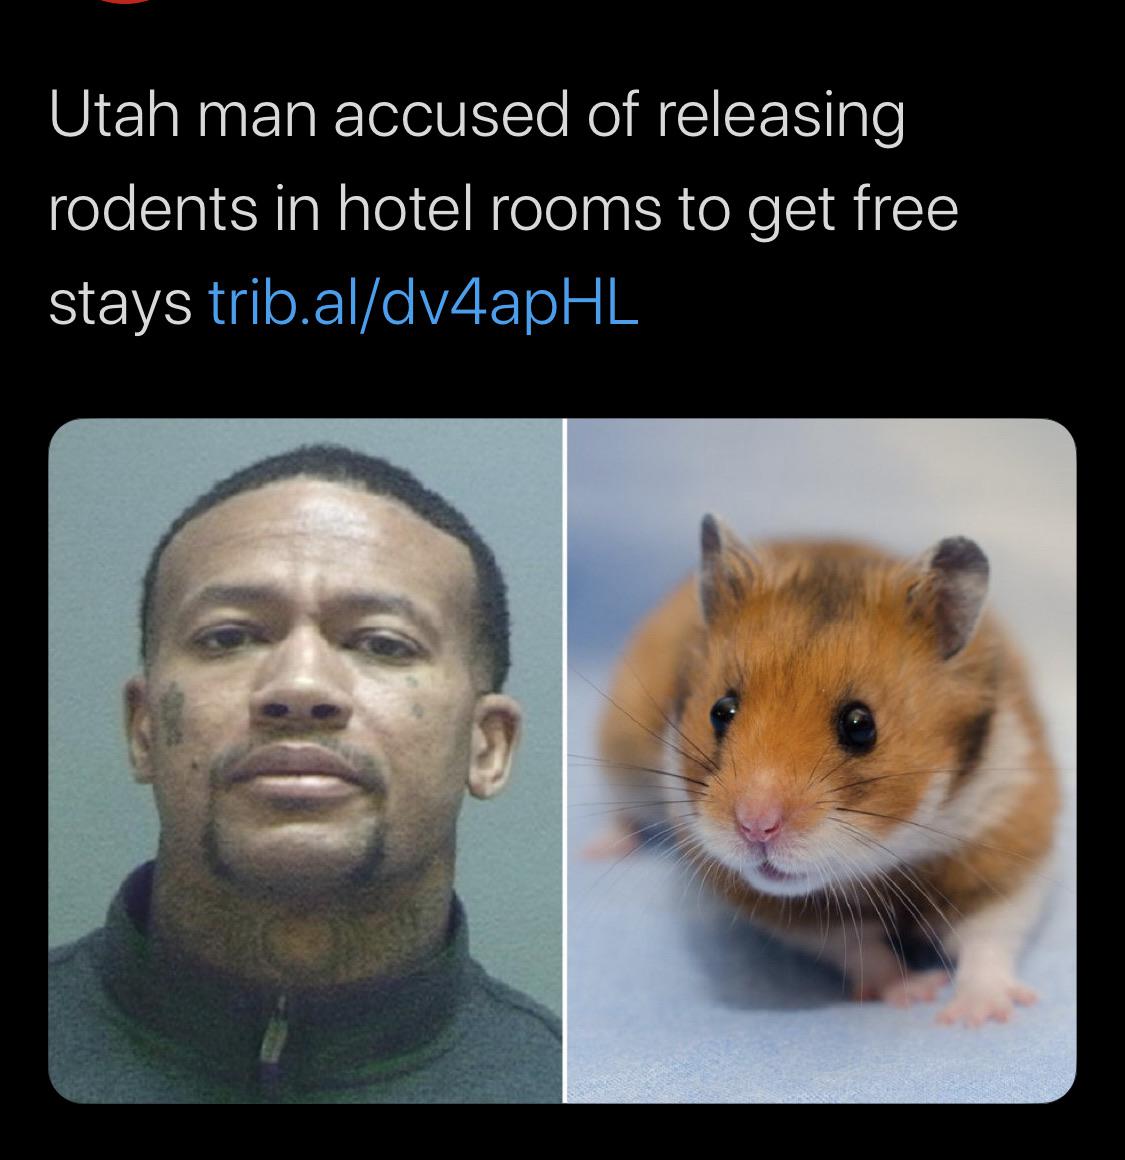 Hotel - Utah man accused of releasing rodents in hotel rooms to get free stays trib.aldv4apHL